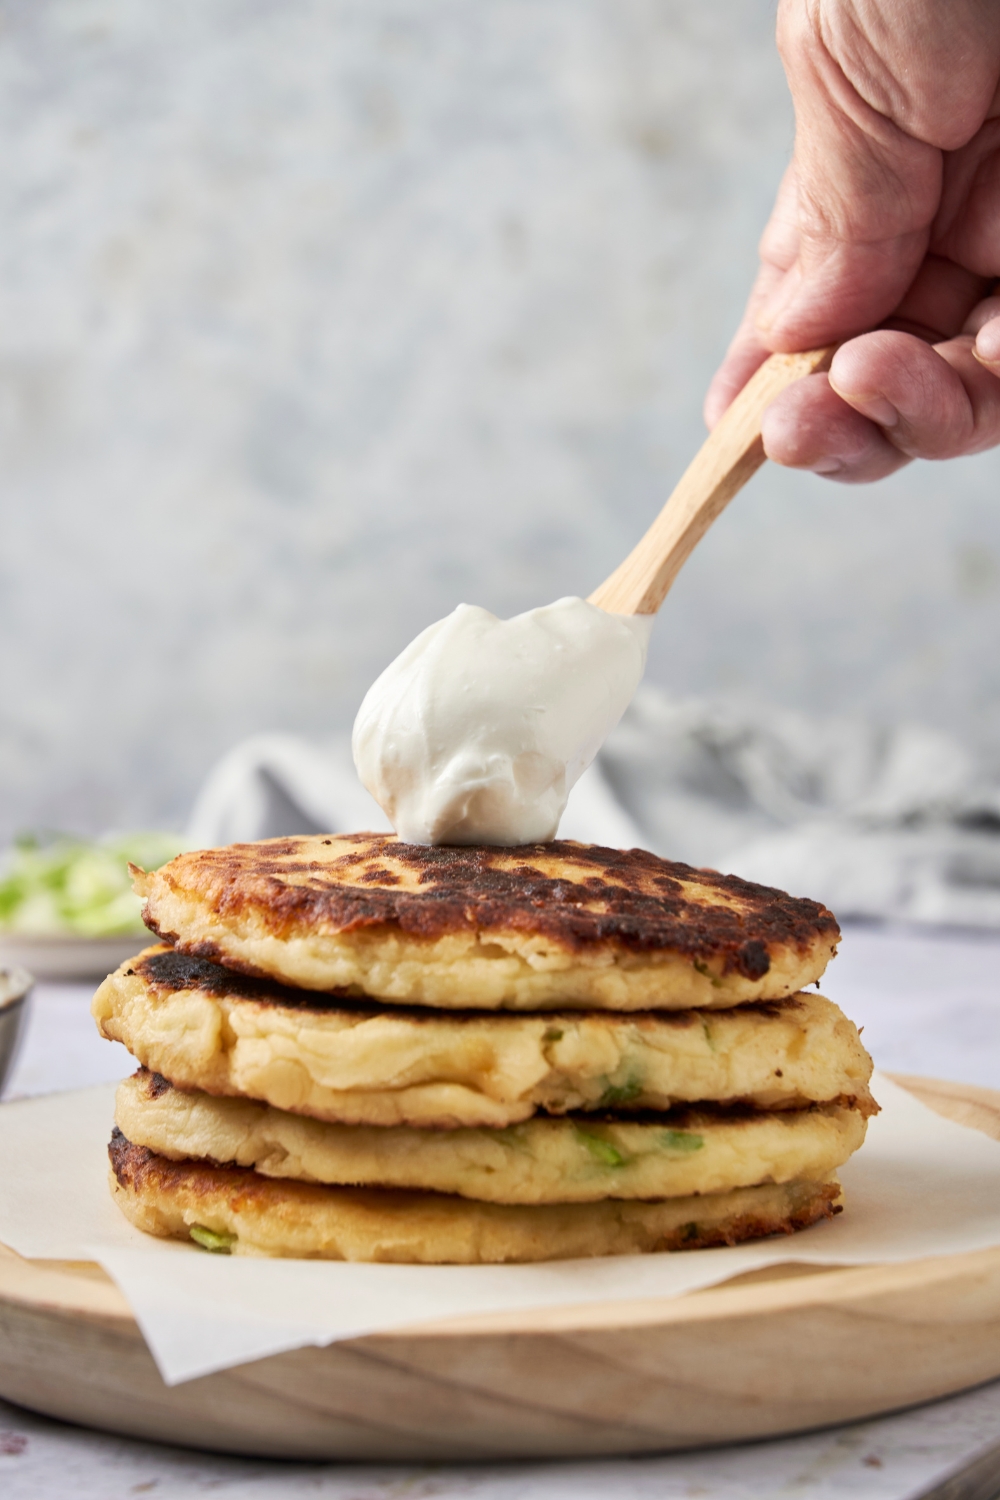 A stack of three mashed potato pancakes. A wooden spoon drops a dollop of sour cream on top.